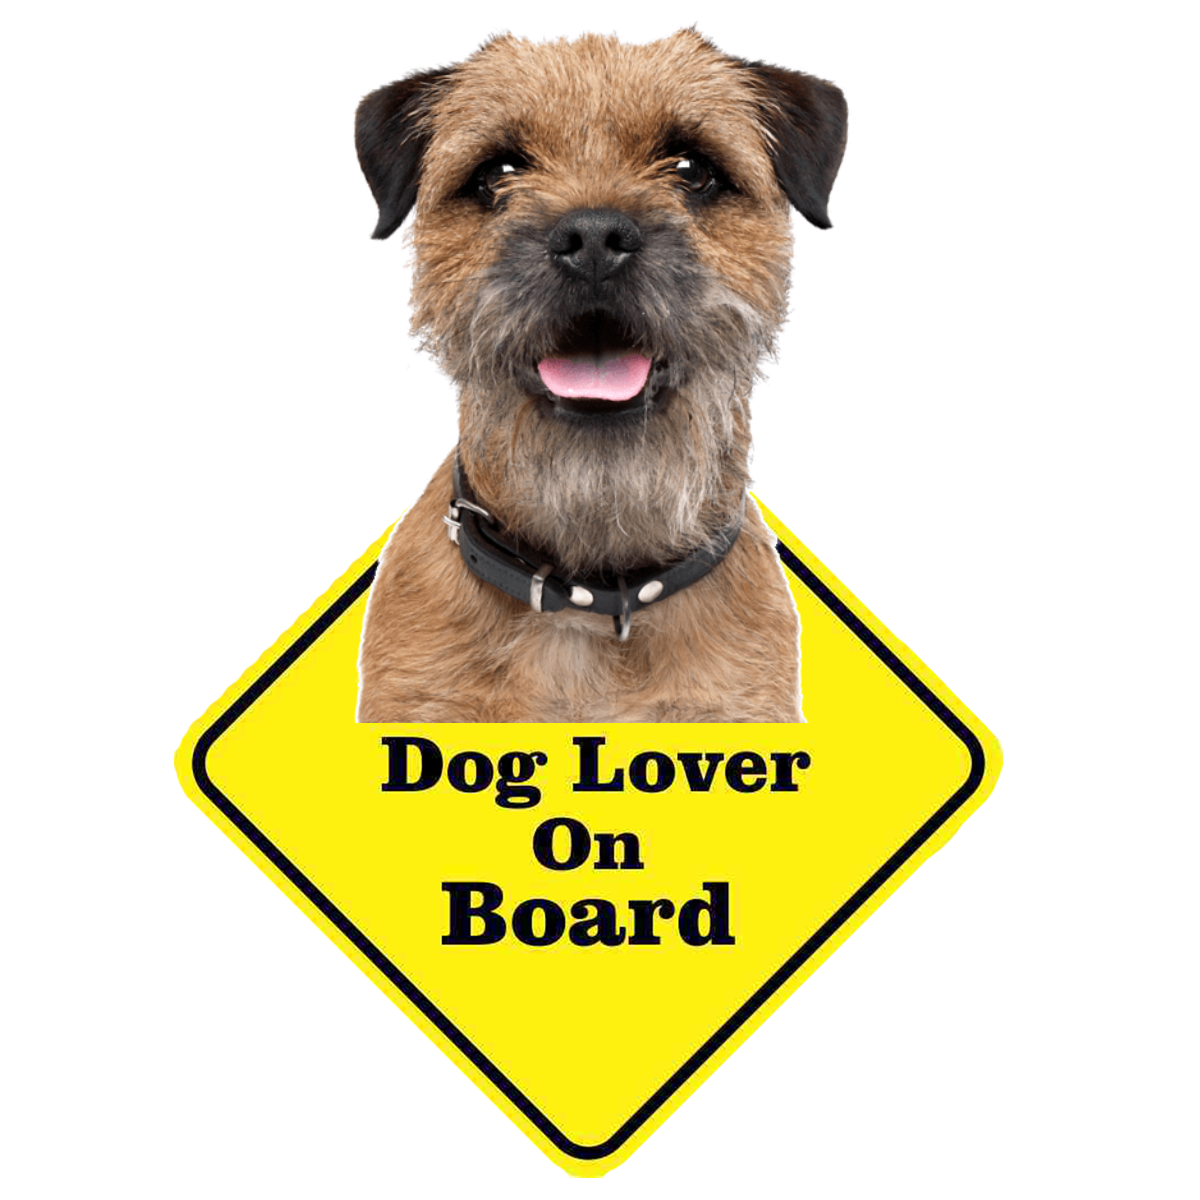 Personalised DOG LOVER ON BOARD Safety Sticker Car Vinyl Stickers Decals Accessories